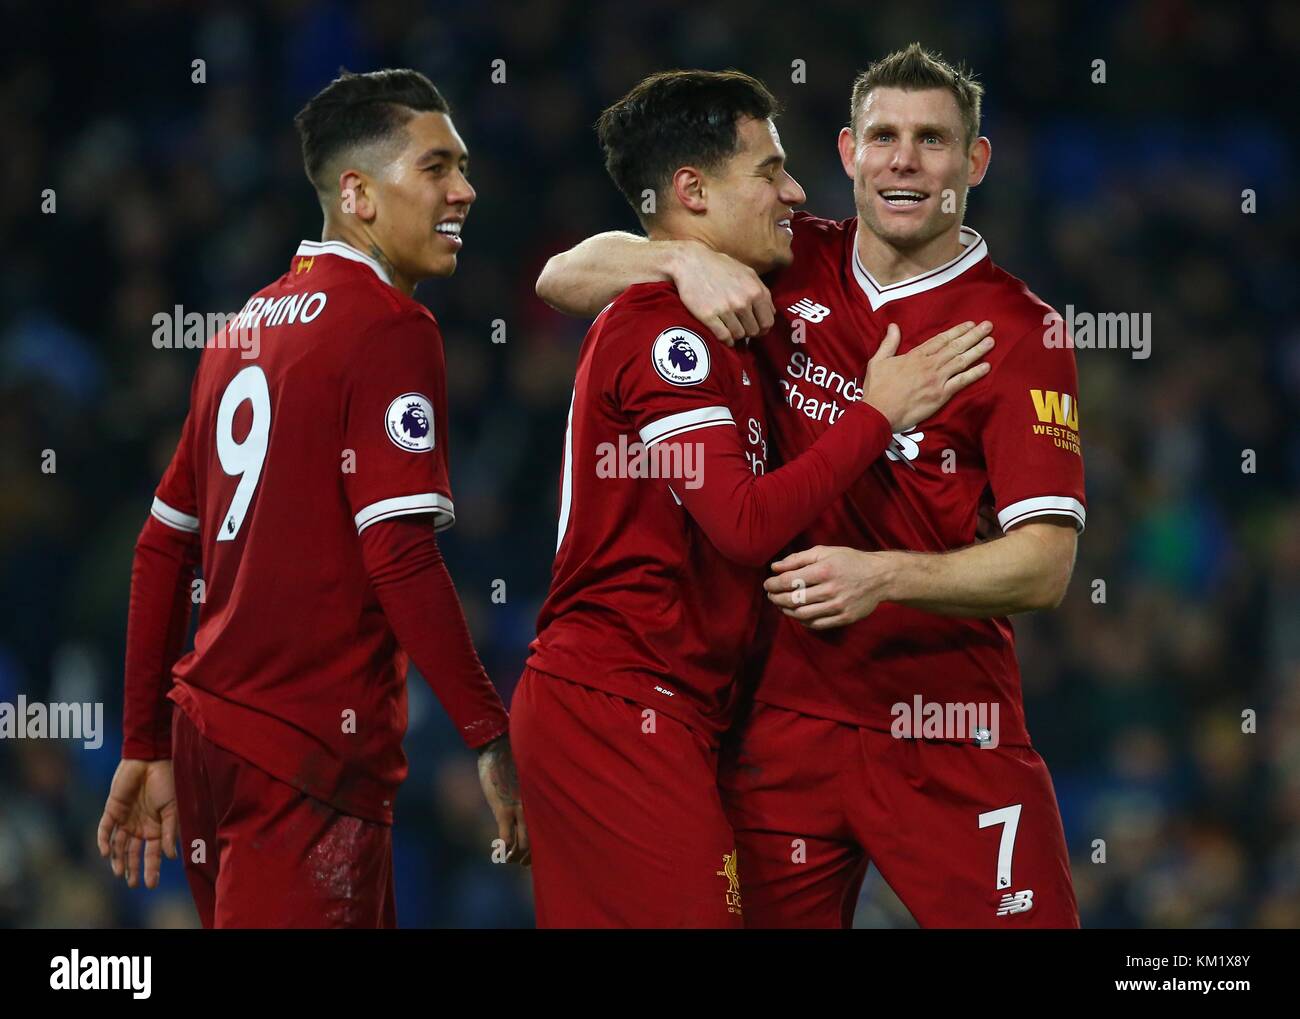 James Milner of Liverpool celebrates with goal scorer Philippe Coutinho during the Premier League match between Brighton and Hove Albion and Liverpool at the American Express Community Stadium in Brighton and Hove. 02 Dec 2017 *** EDITORIAL USE ONLY *** FA Premier League and Football League images are subject to DataCo Licence see www.football-dataco.com Stock Photo